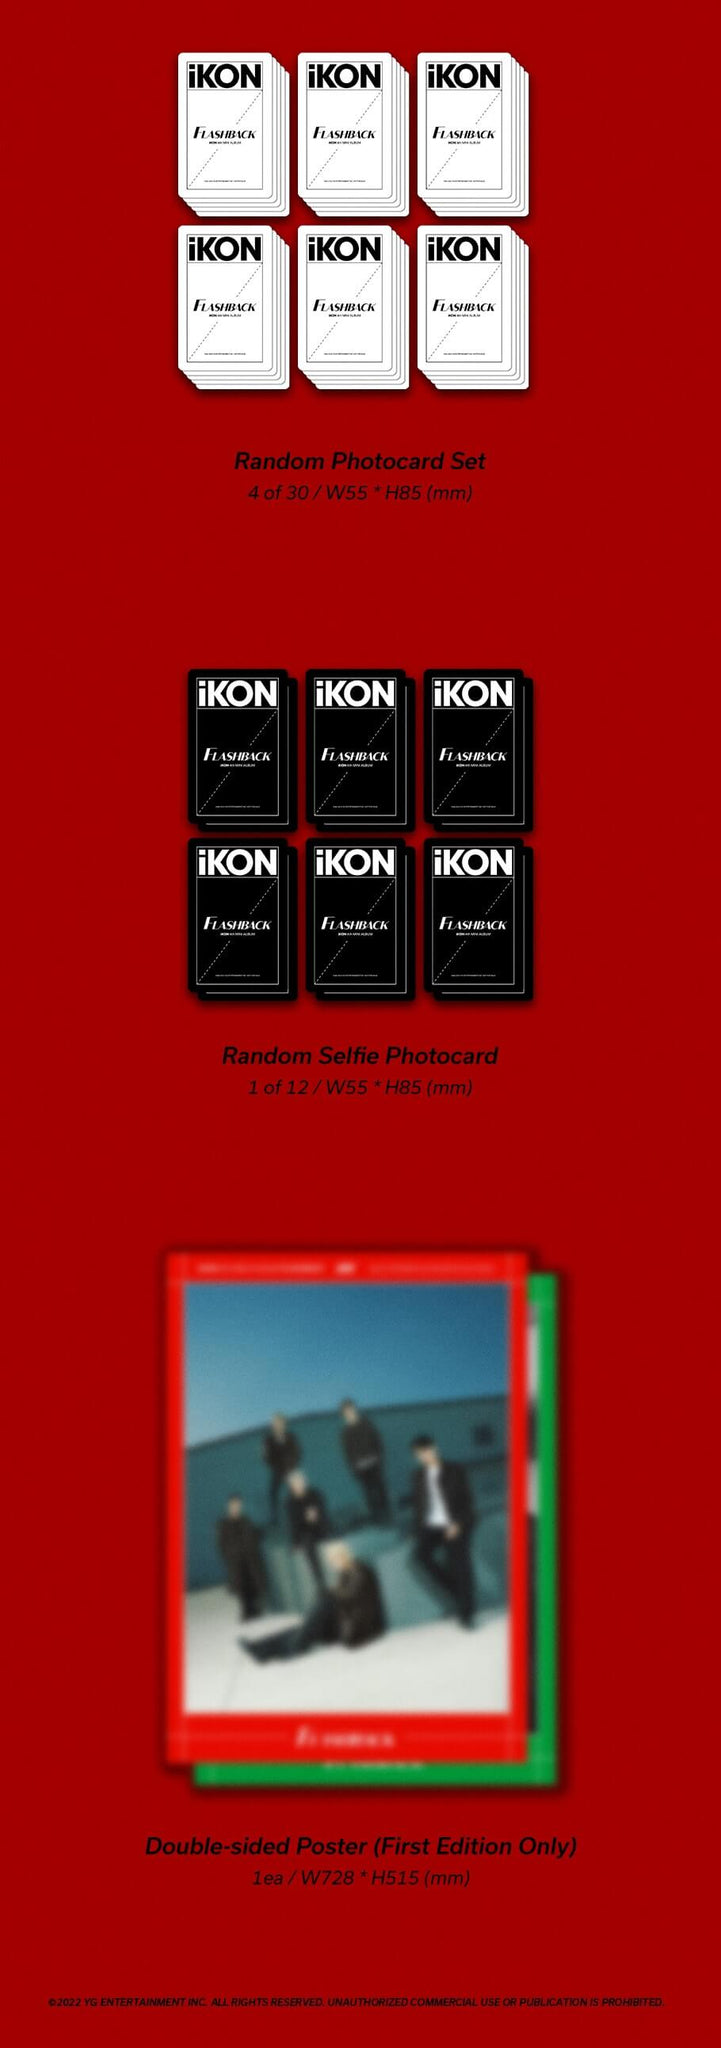 iKON FLASHBACK (Photobook Version) RED Version Inclusions Random Photocard Set Random Selfie Photocard 1st Press Only Double-sided Poster